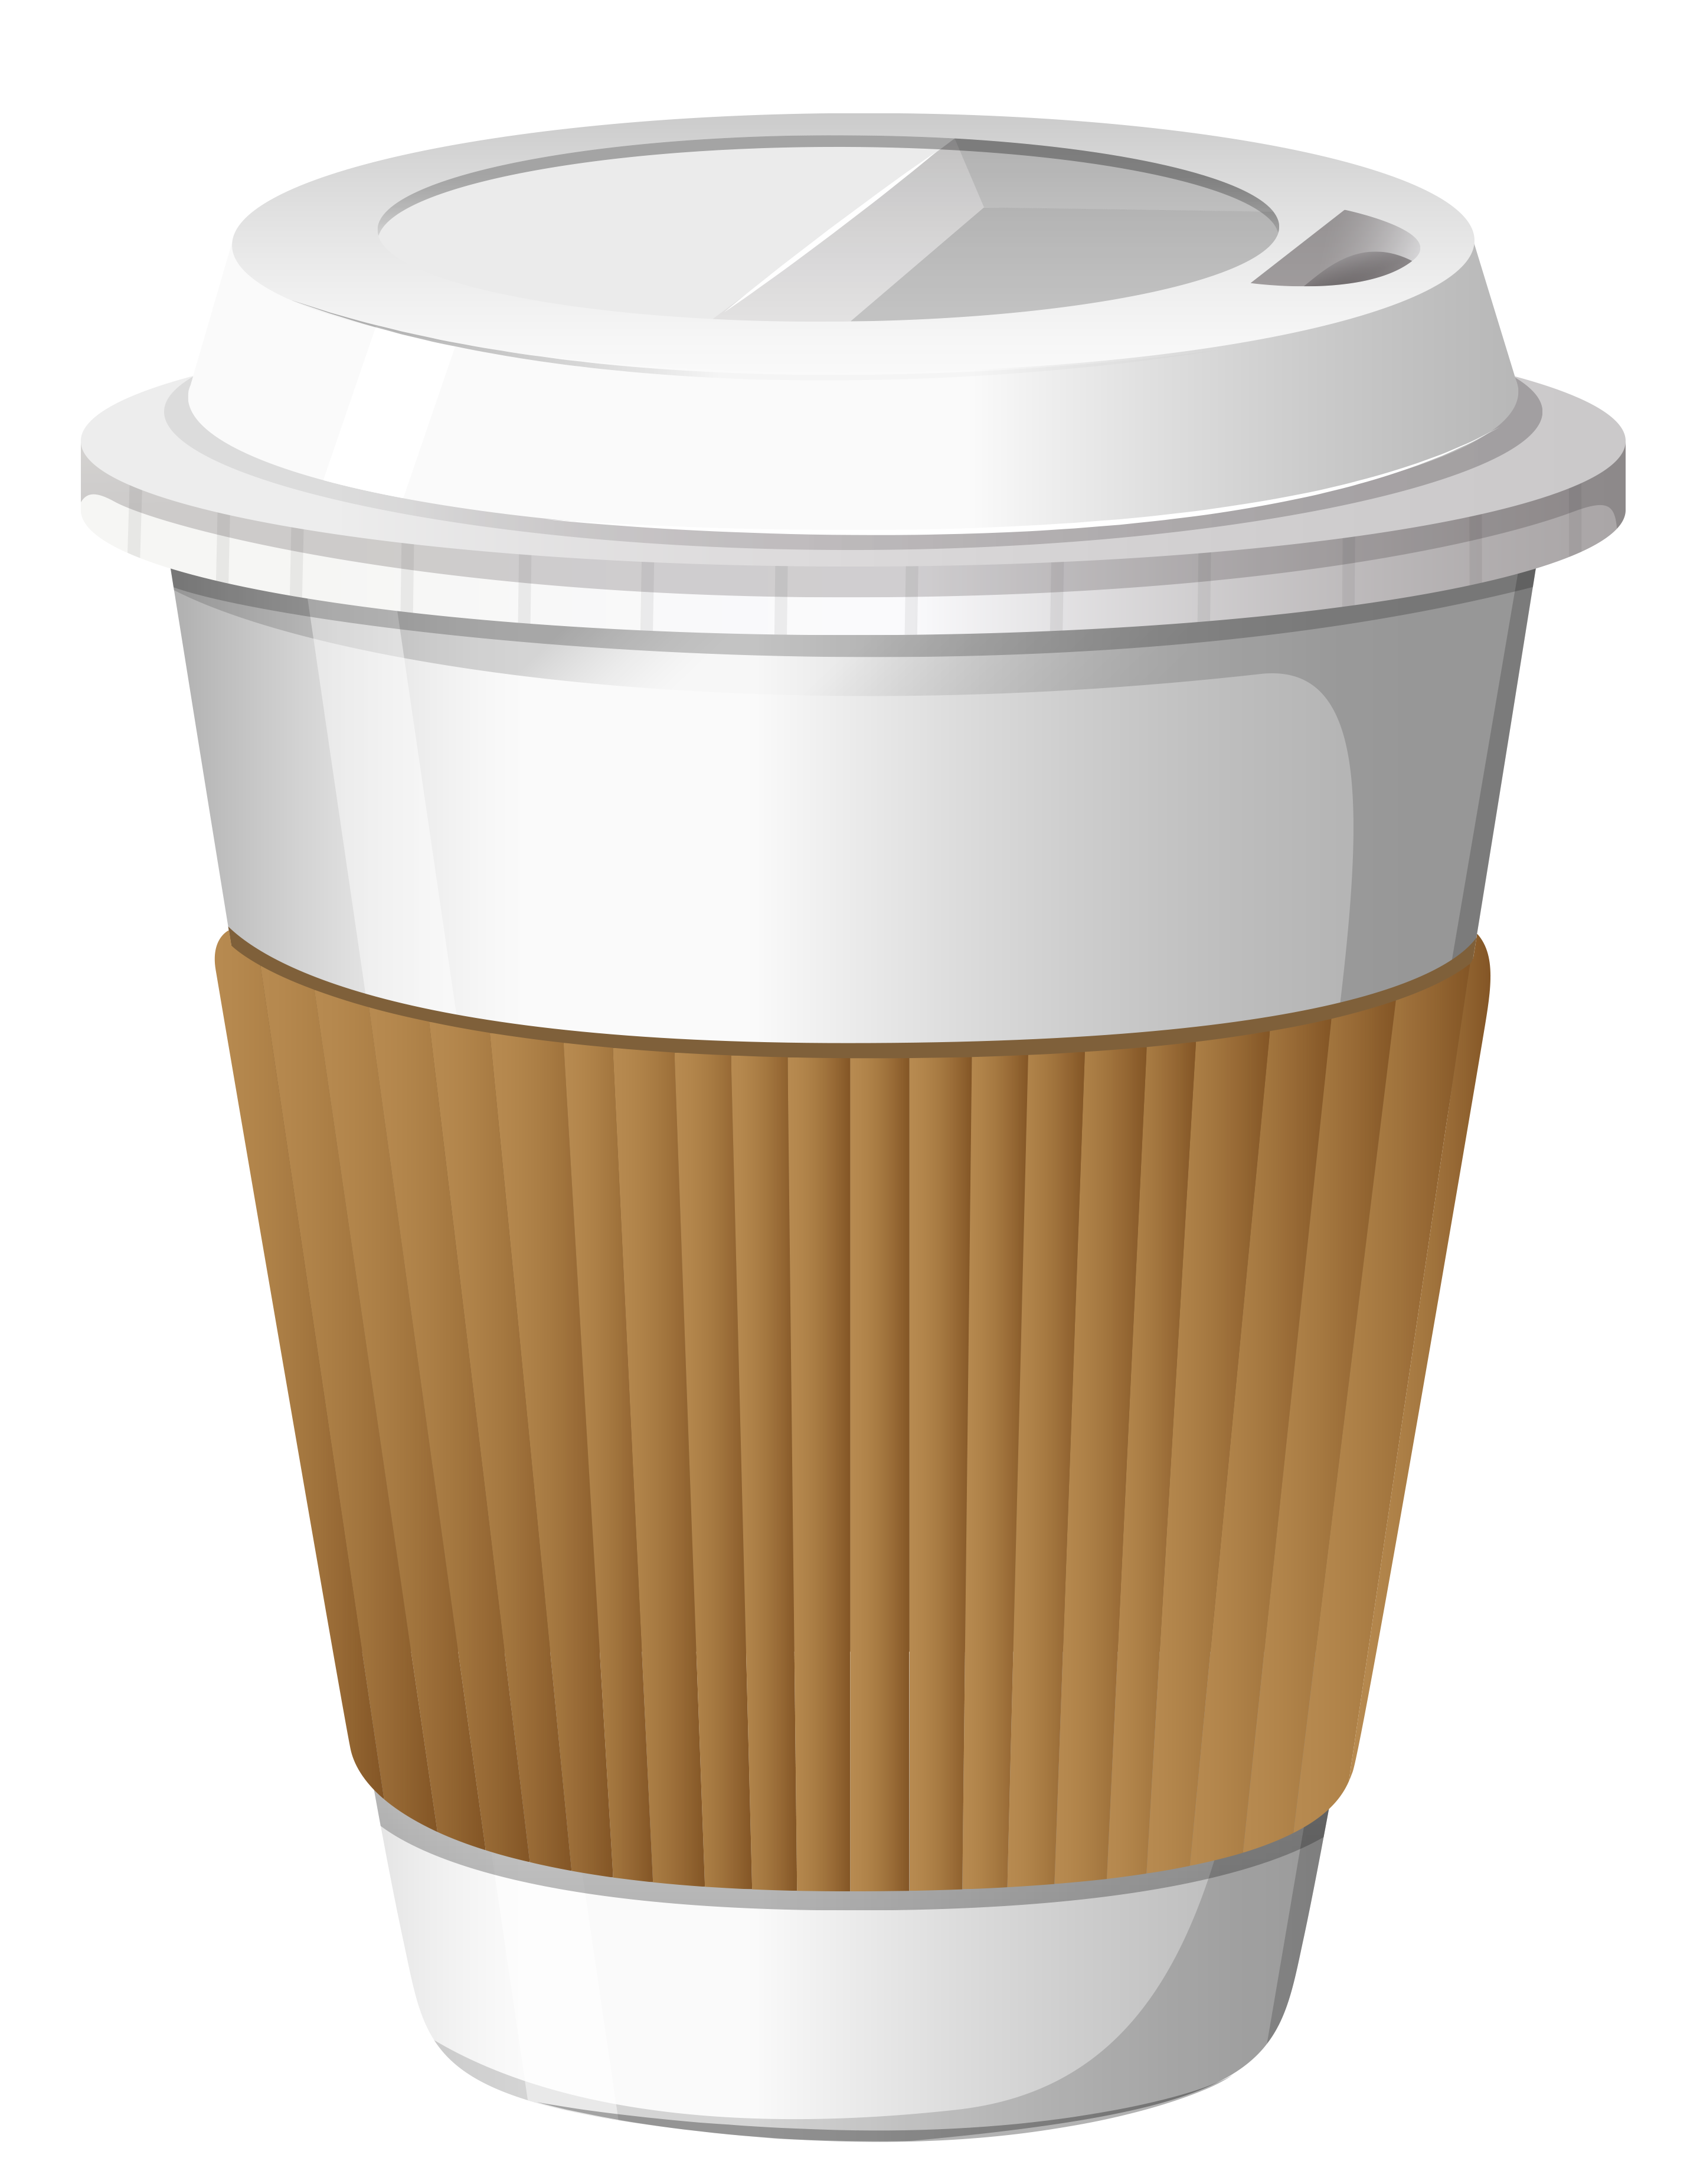 https://gallery.yopriceville.com/var/albums/Free-Clipart-Pictures/Coffee-PNG/Coffee_Cup_PNG_Clipar_Picture.png?m=1434276736